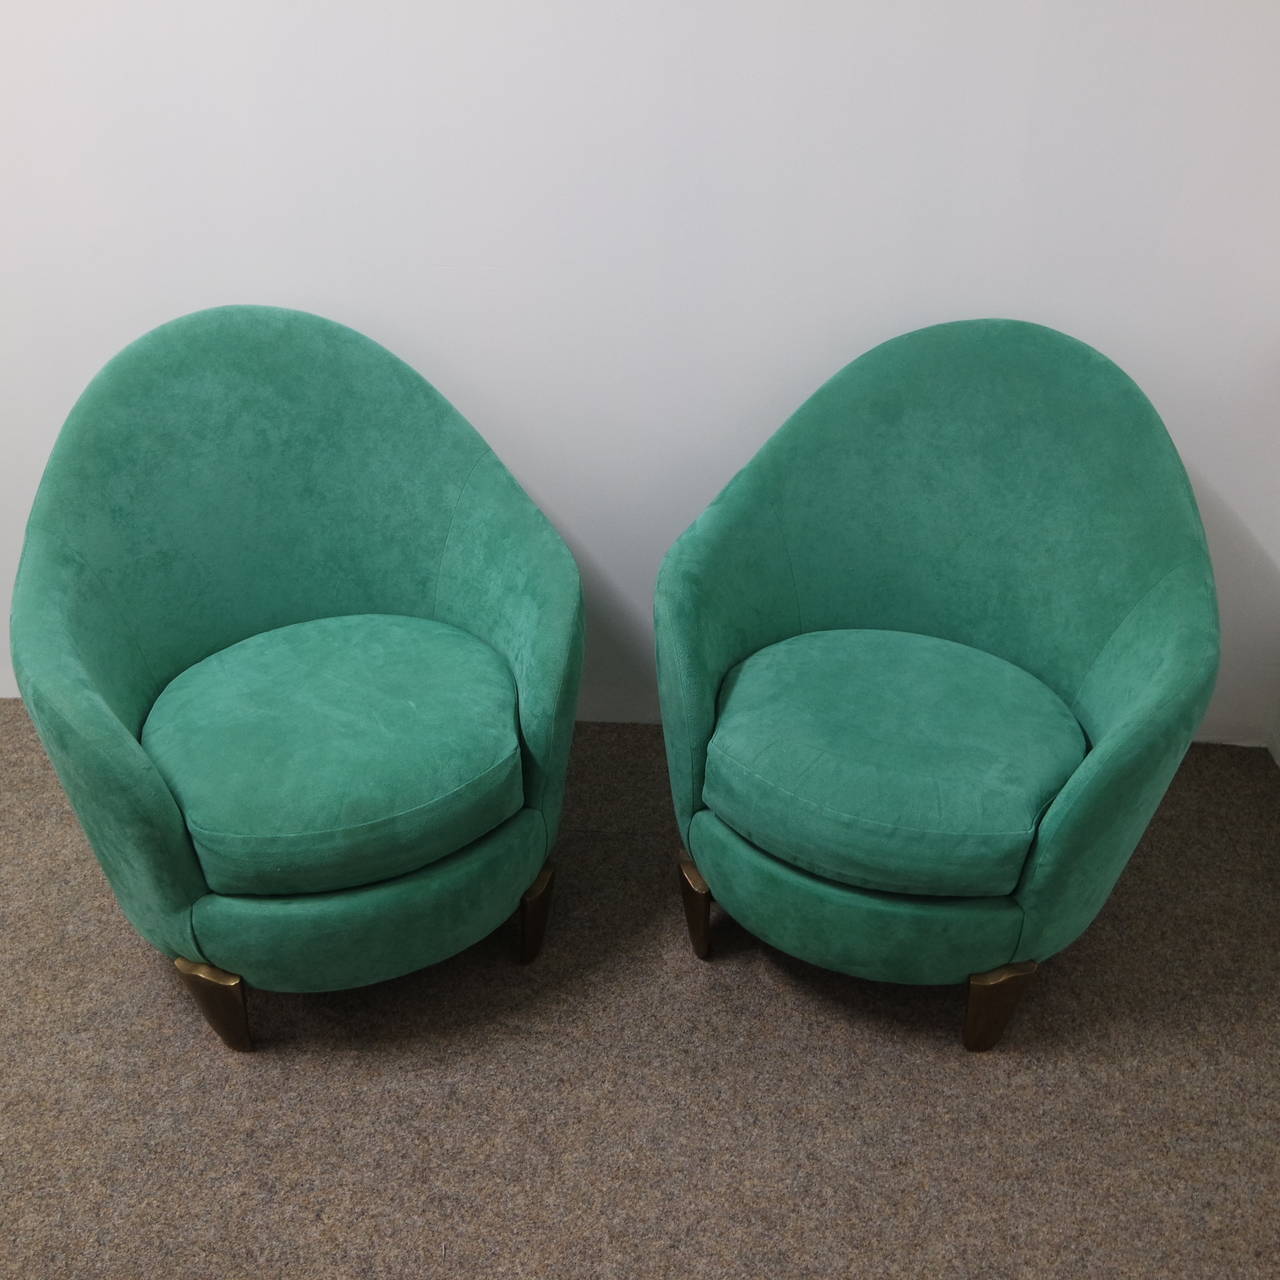 Two famous koala armchairs designed by Elizabeth Garouste and Mattia Bonetti, edited by Neotu in the 1980s.
The chairs are covered with a green alcantara and feet are in bronze.